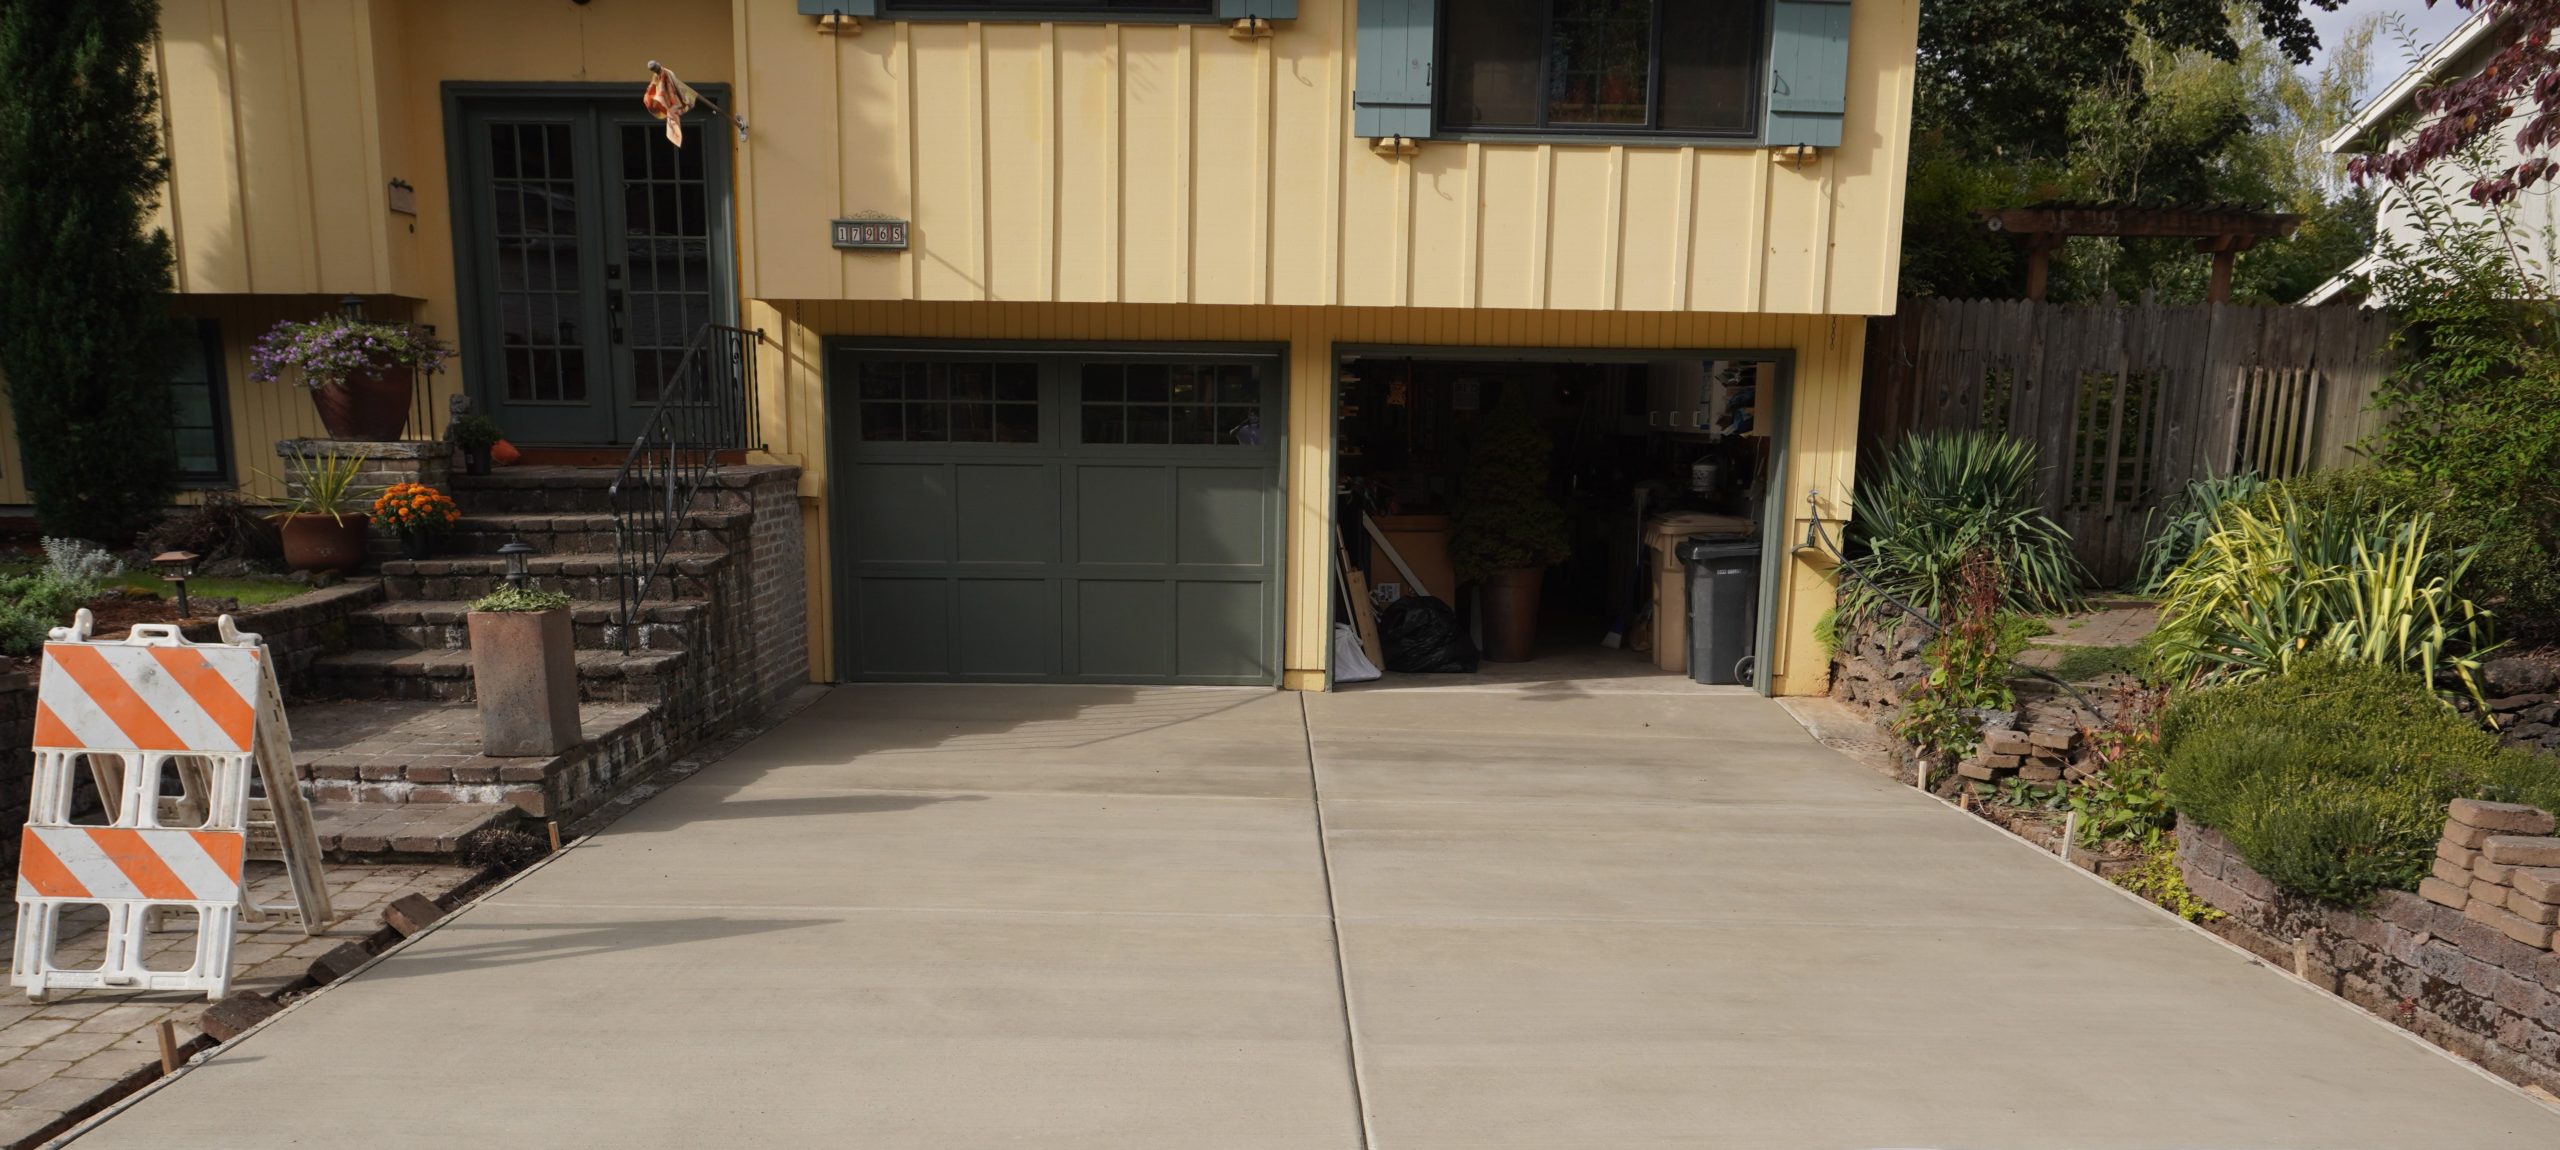 What benefits of installing a new concrete driveway at your home?